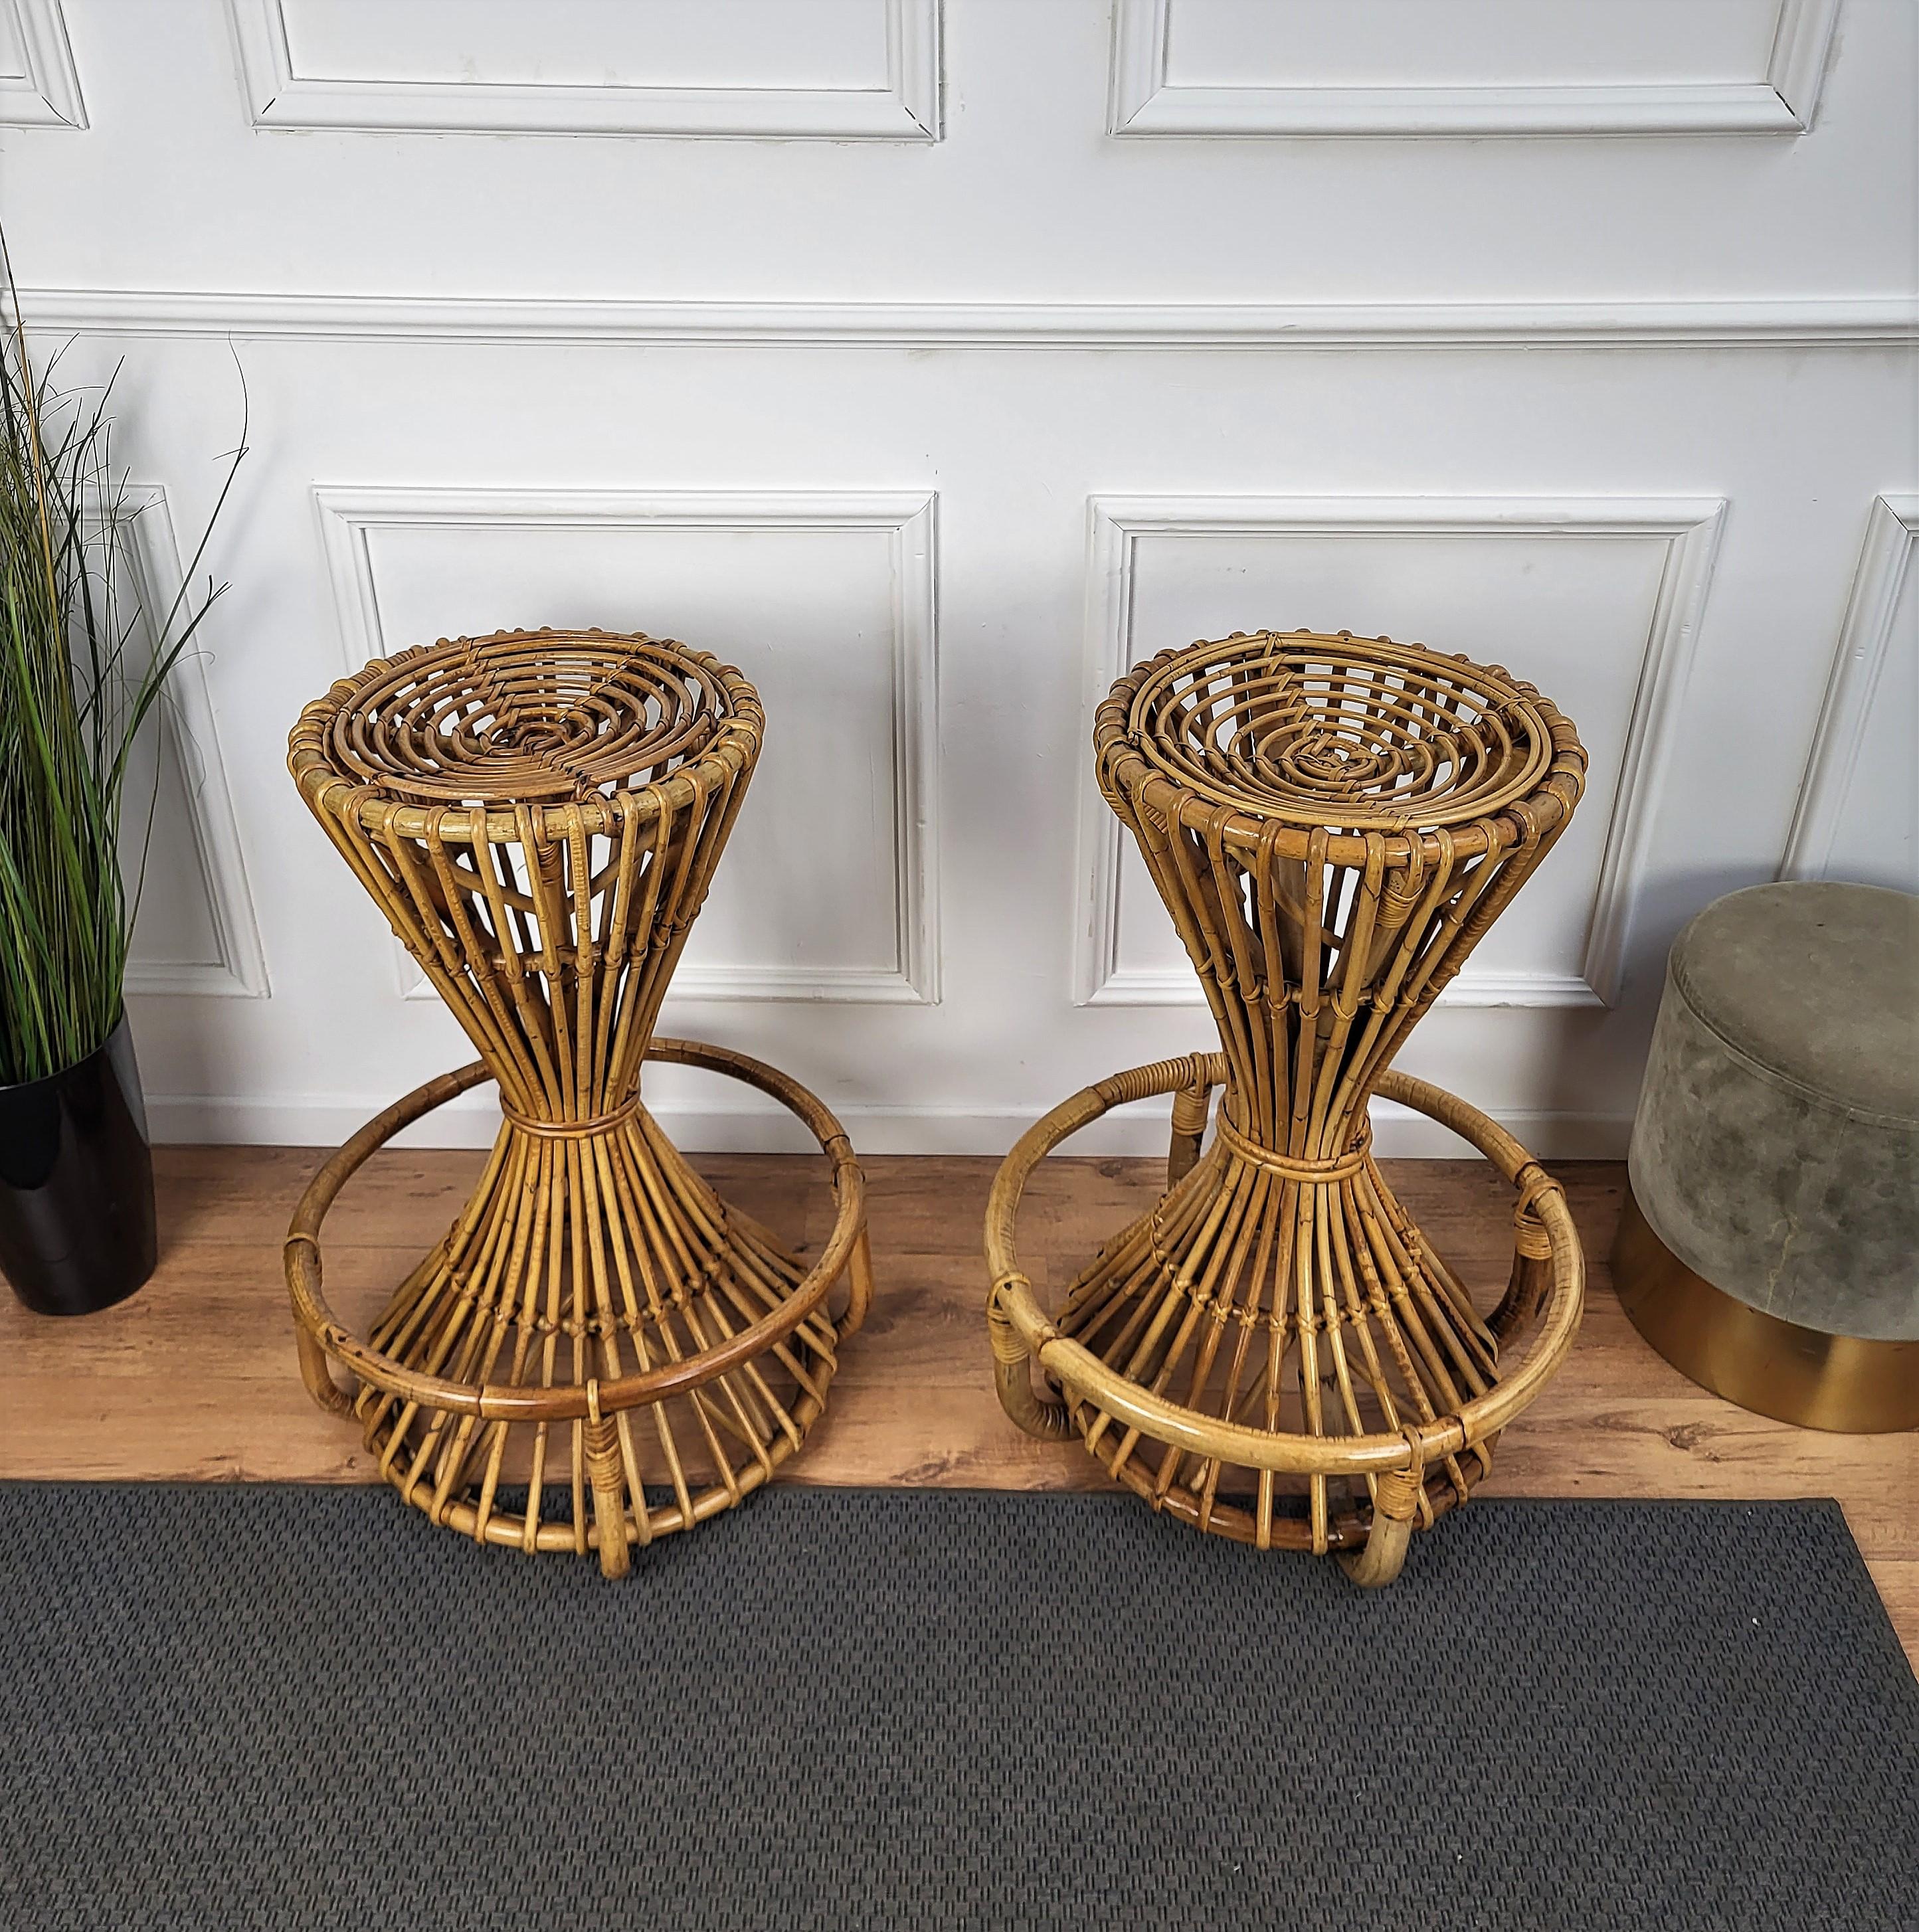 Beautiful 1960s Italian Mid-Century Modern Vintage Rattan barstools made of rattan or wicker have a very sculptural form. The rattan in various brown shades works very well with all colors in your decor. Could be used as a barstool or place it in a